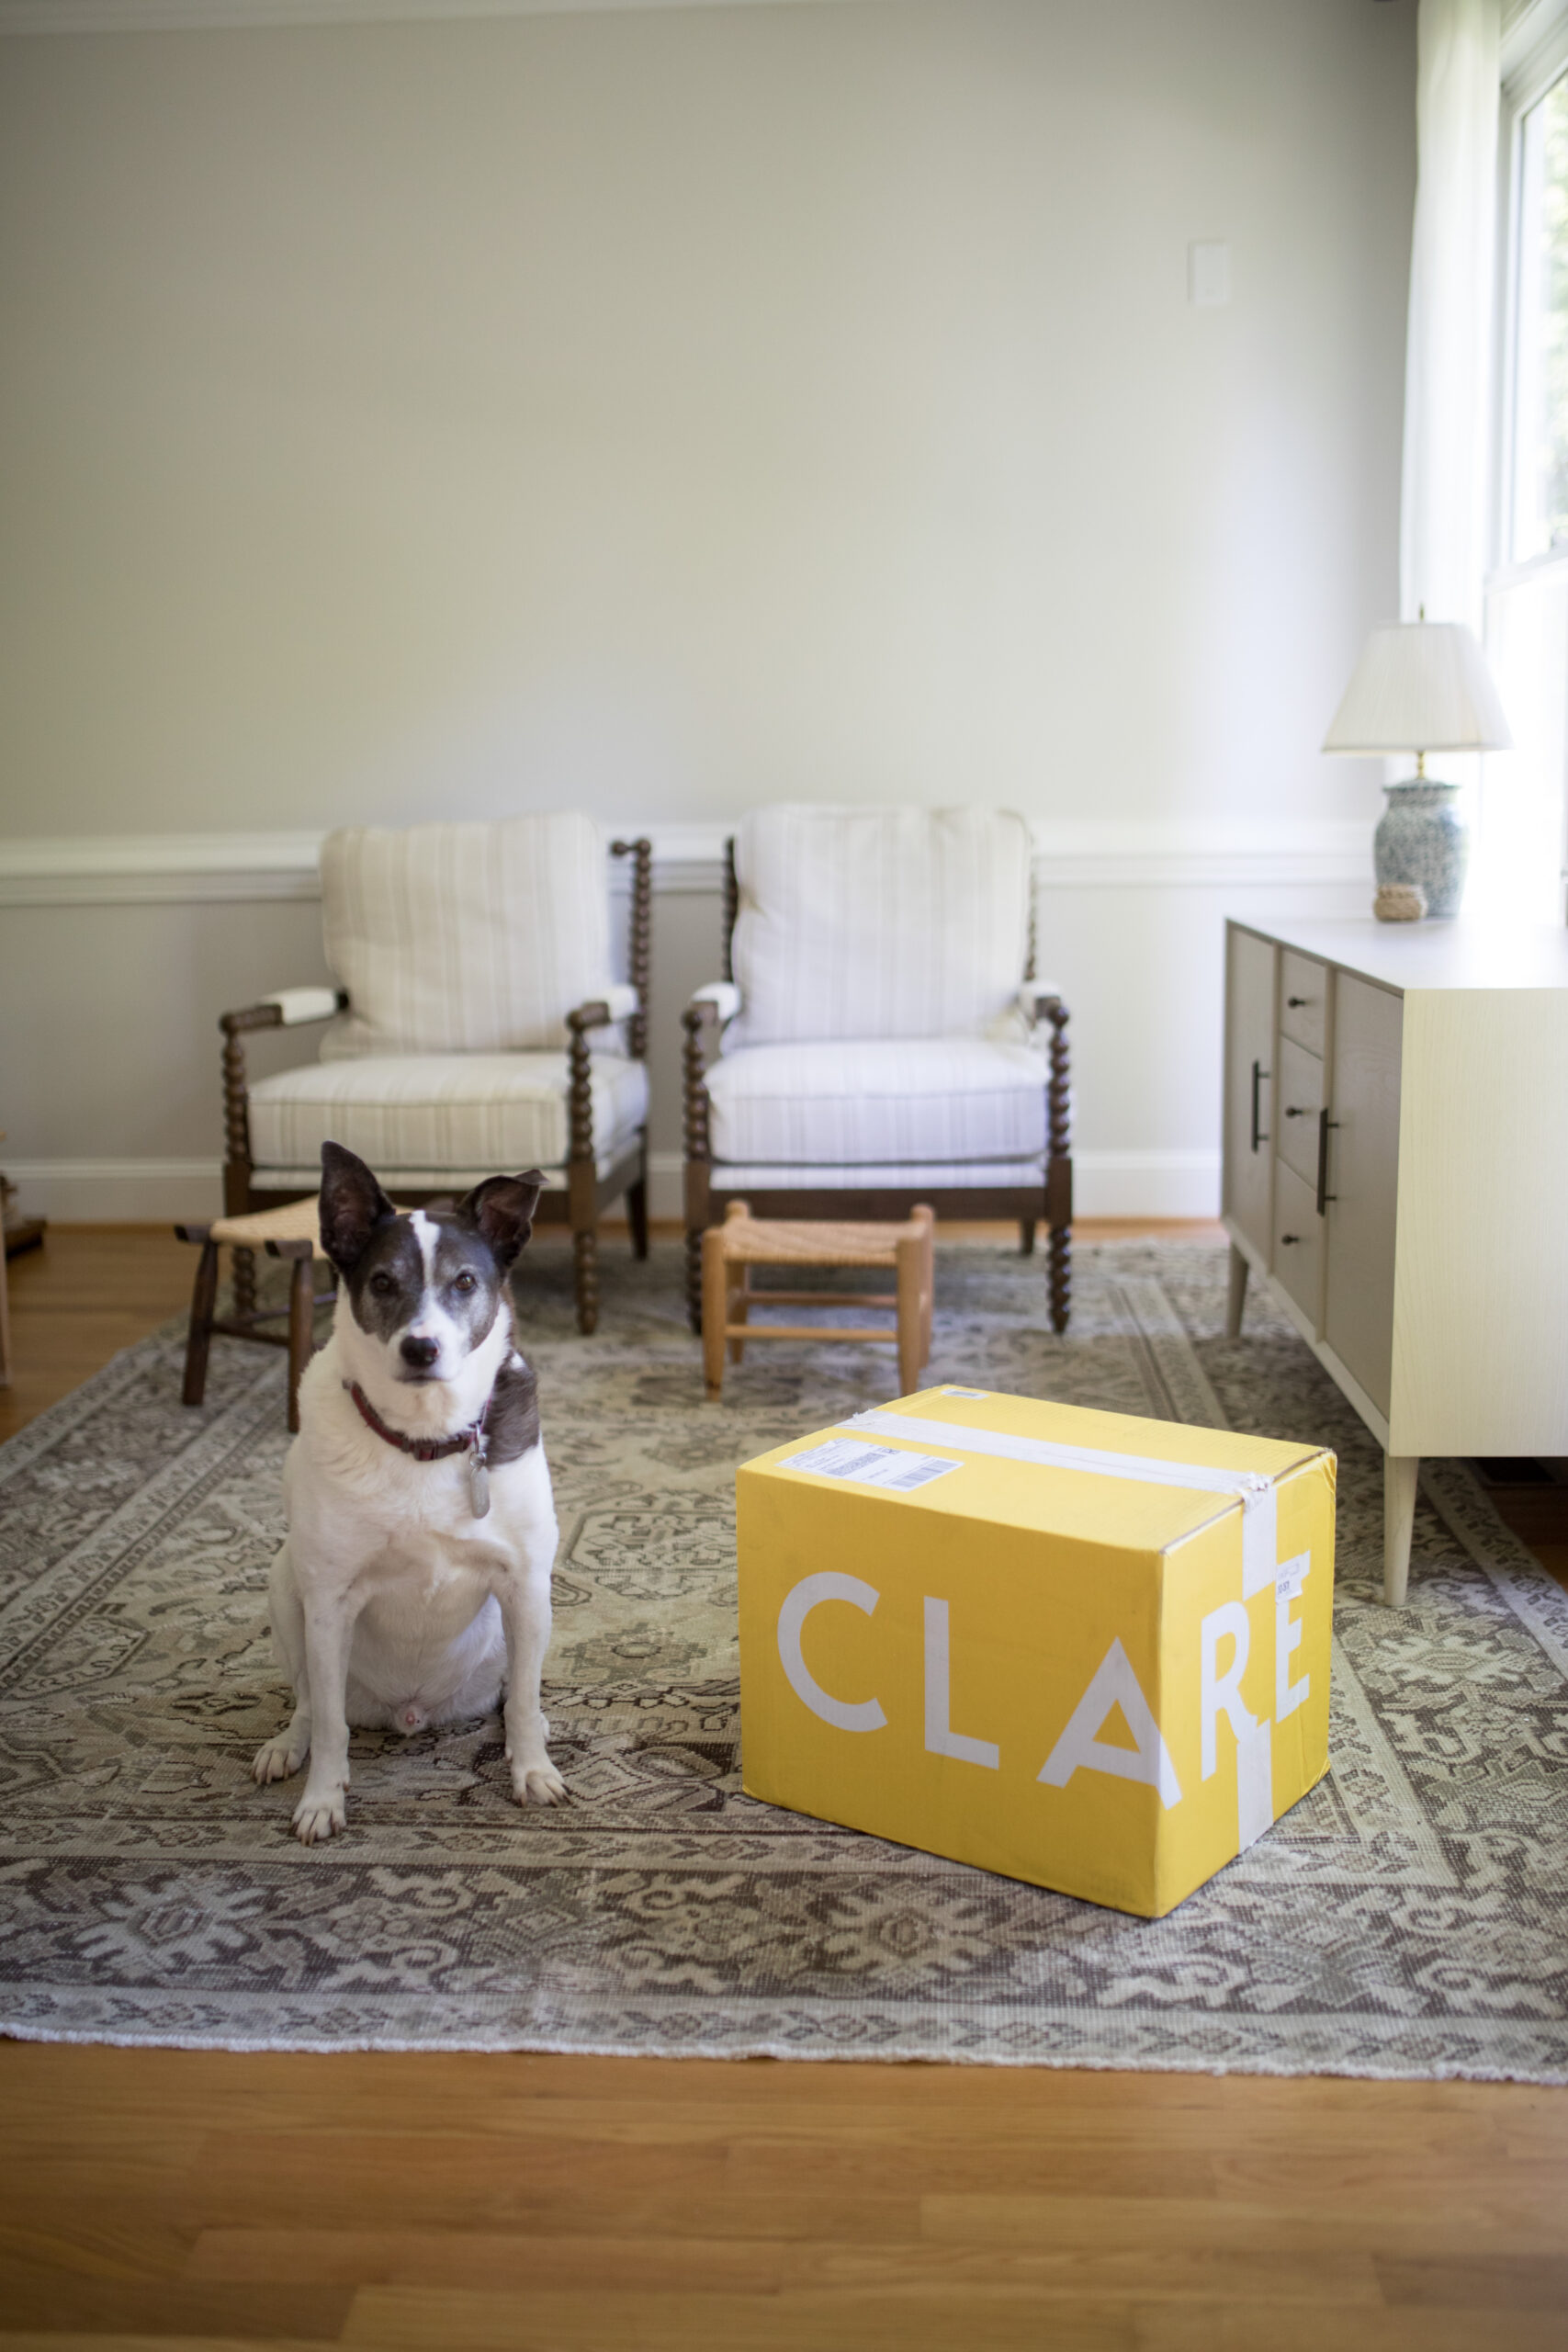 A white dog with dark brown ears and face, along with a brown patch on its right shoulder, sits next to a yellow box on the floor that says “Clare” in white all caps as it’s a box from Clare Paint. Two brown chairs covered in white cushions sit behind the dog, and a white low storage table sits to the right. The walls are cream.